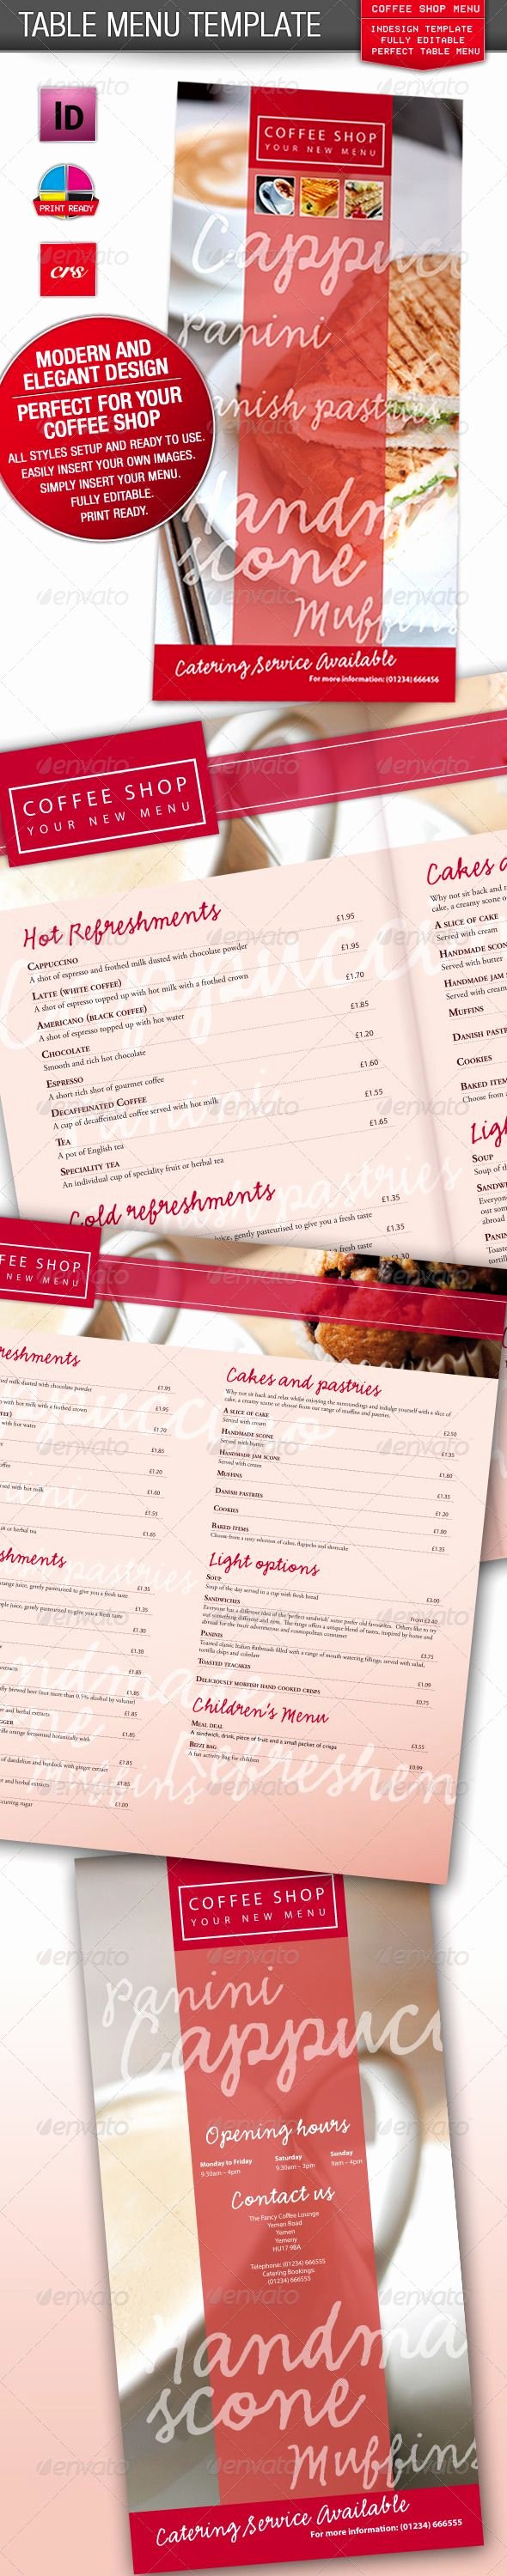 Coffee Shop Menu Template Best Of 17 Best Images About Print Templates On Pinterest